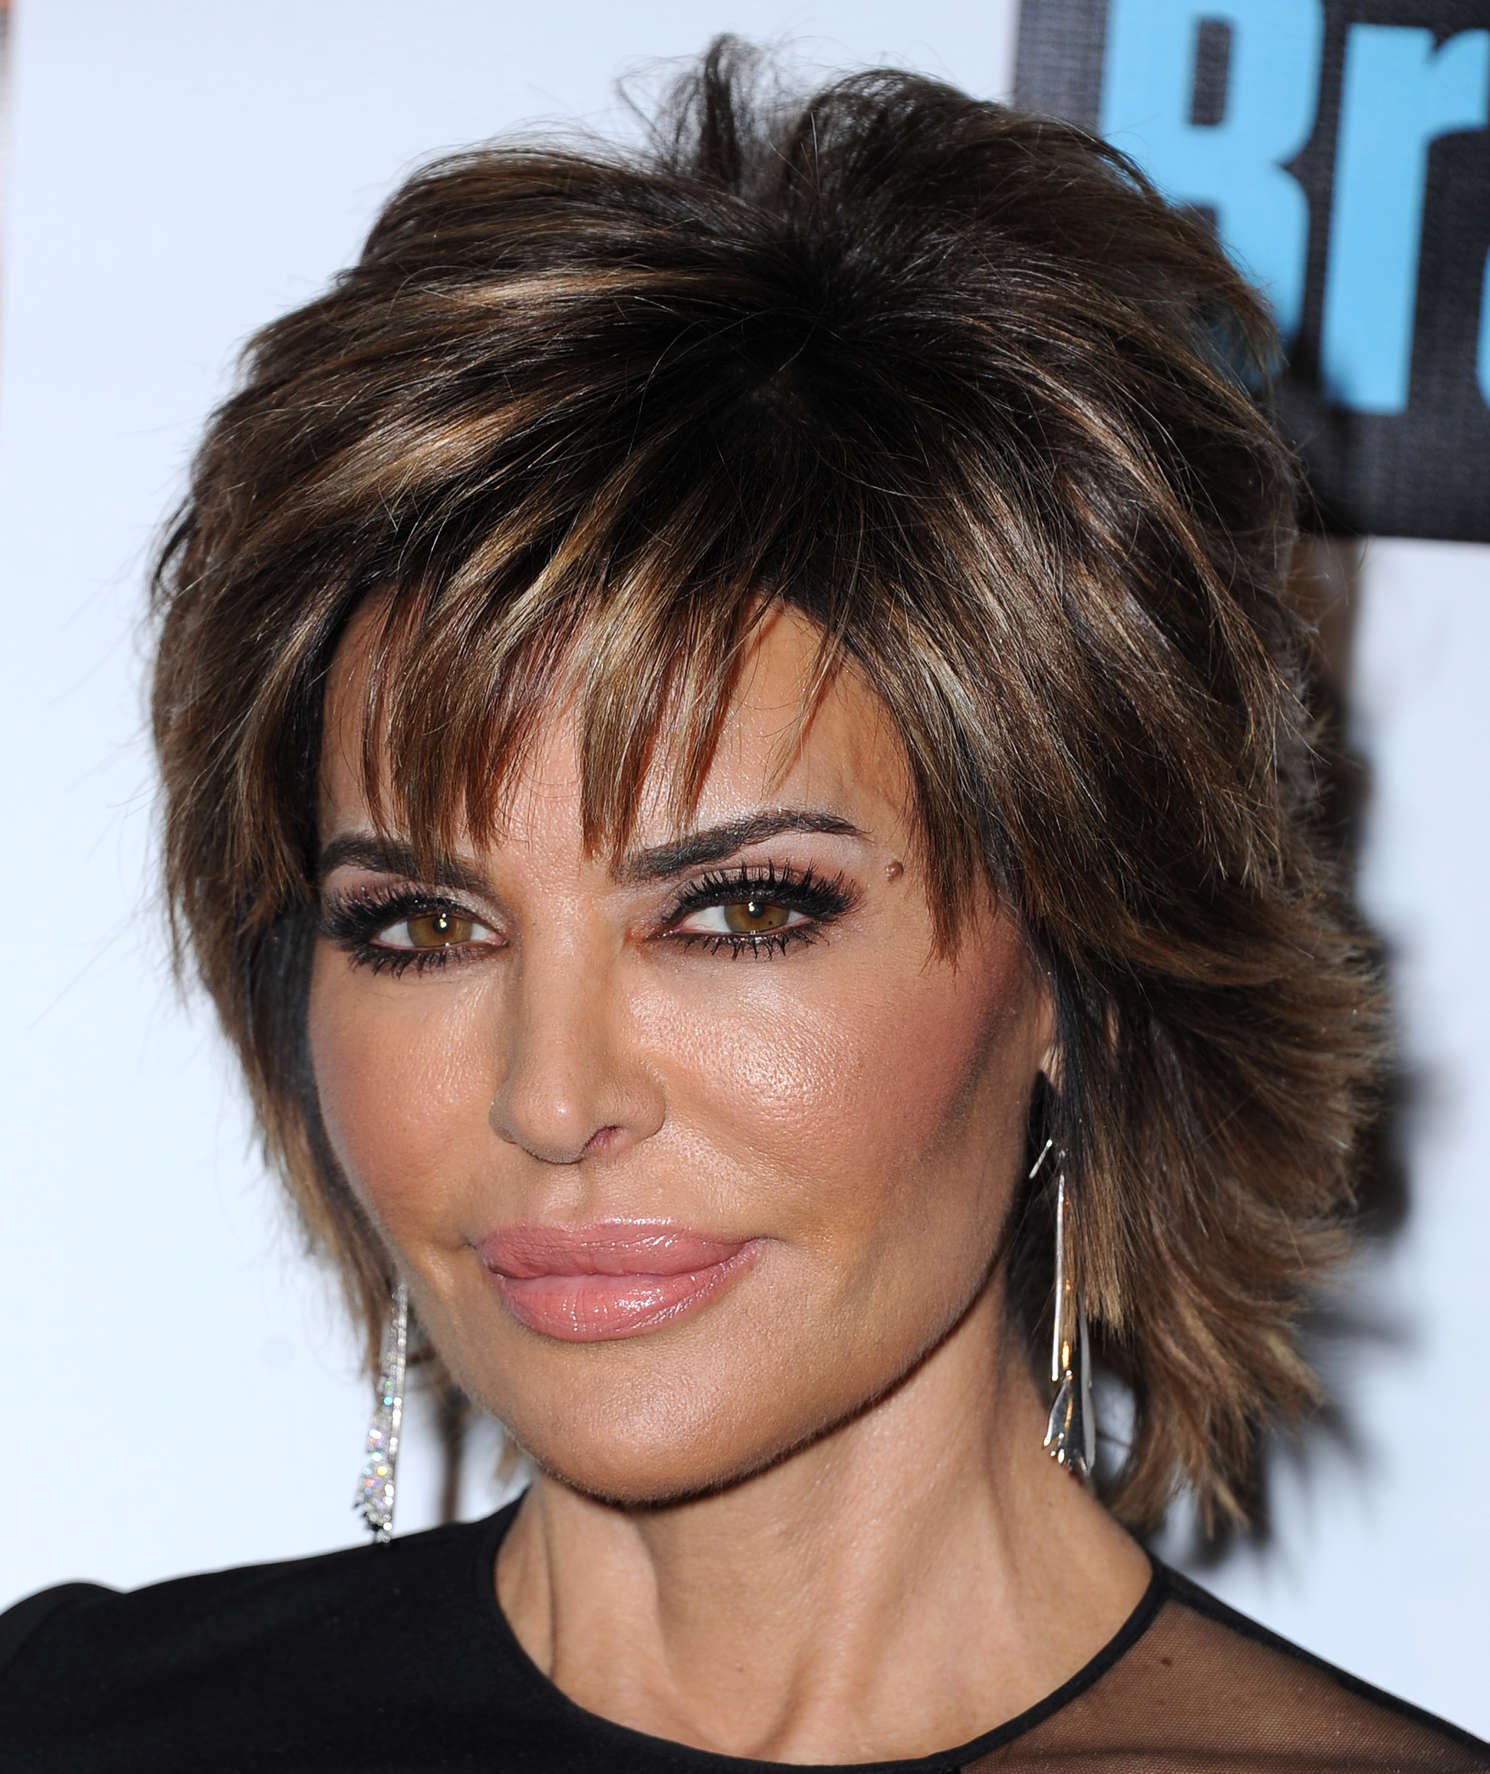 Lisa Rinna The Real Housewives Of Beverly Hills Season 6 Premiere